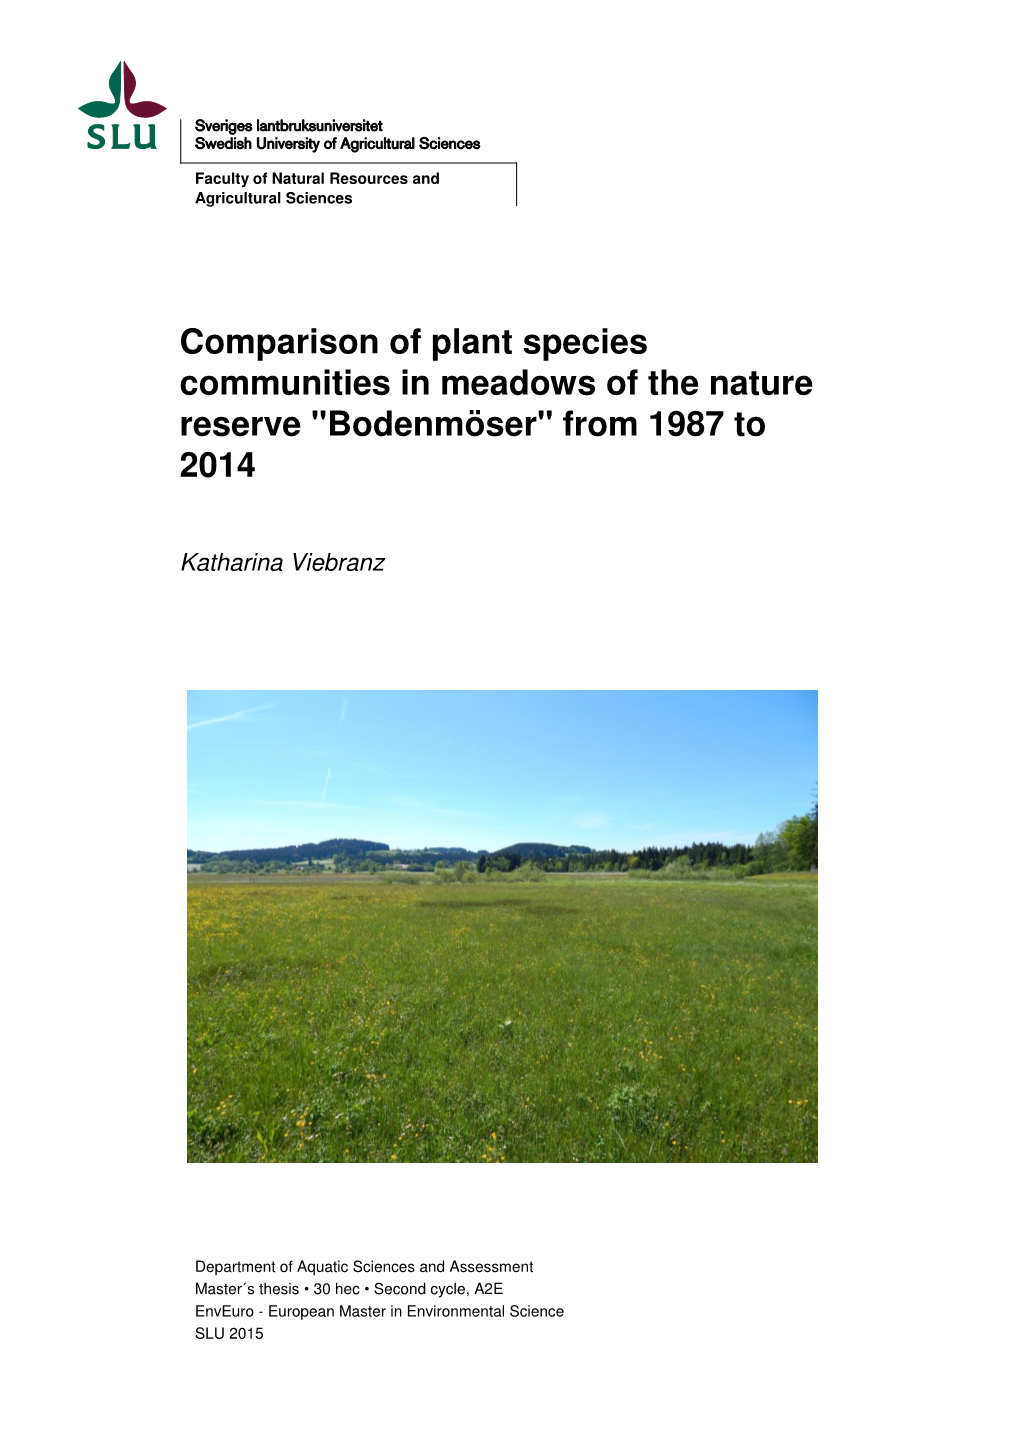 Comparison of Plant Species Communities in Meadows of the Nature Reserve "Bodenmöser" from 1987 to 2014